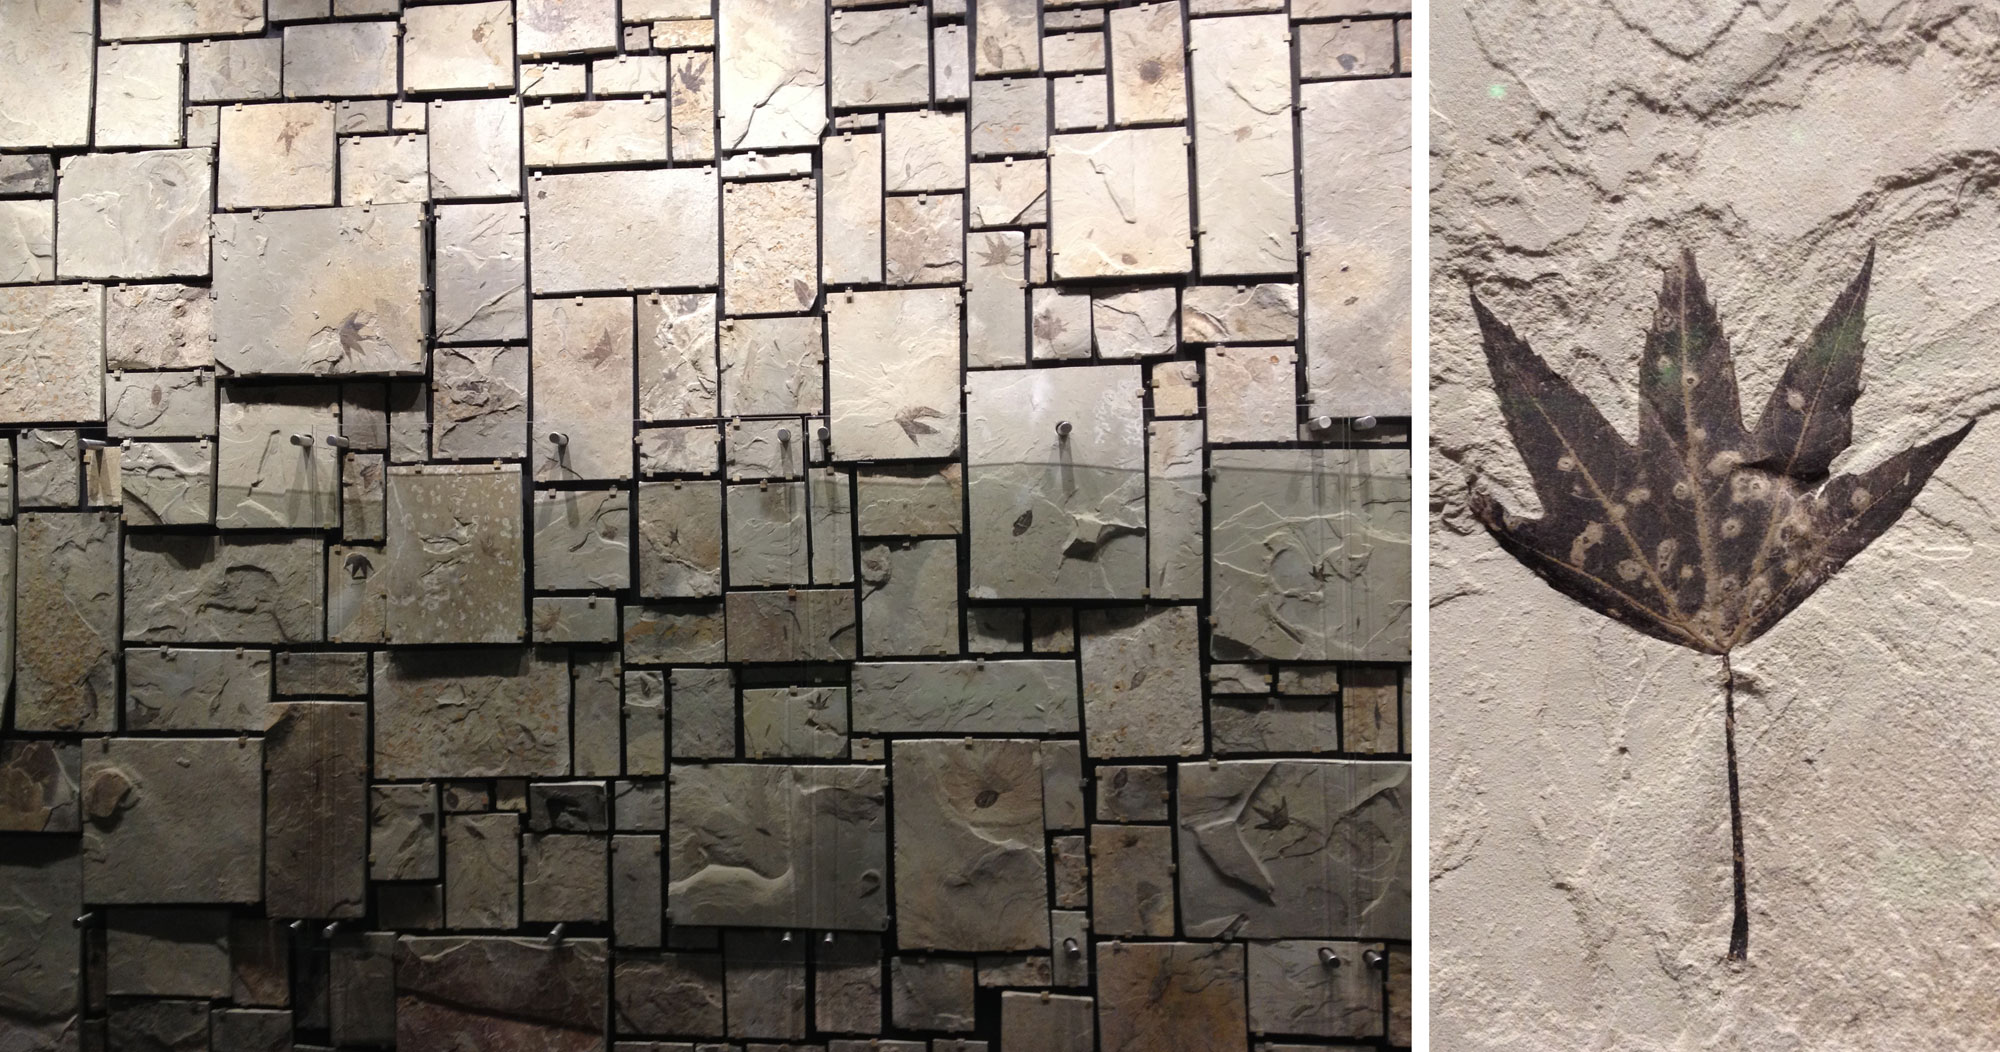 2-panel image showing photos of Green River plant fossils. Panel 1: Photograph of a display of plant fossils made up of a series of rectangular blocks of rock with fossils mounted on a wall. Right: Photograph of a fossil Macginitea leaf, a palmately lobed leaf with five lobes and a toothed margin.